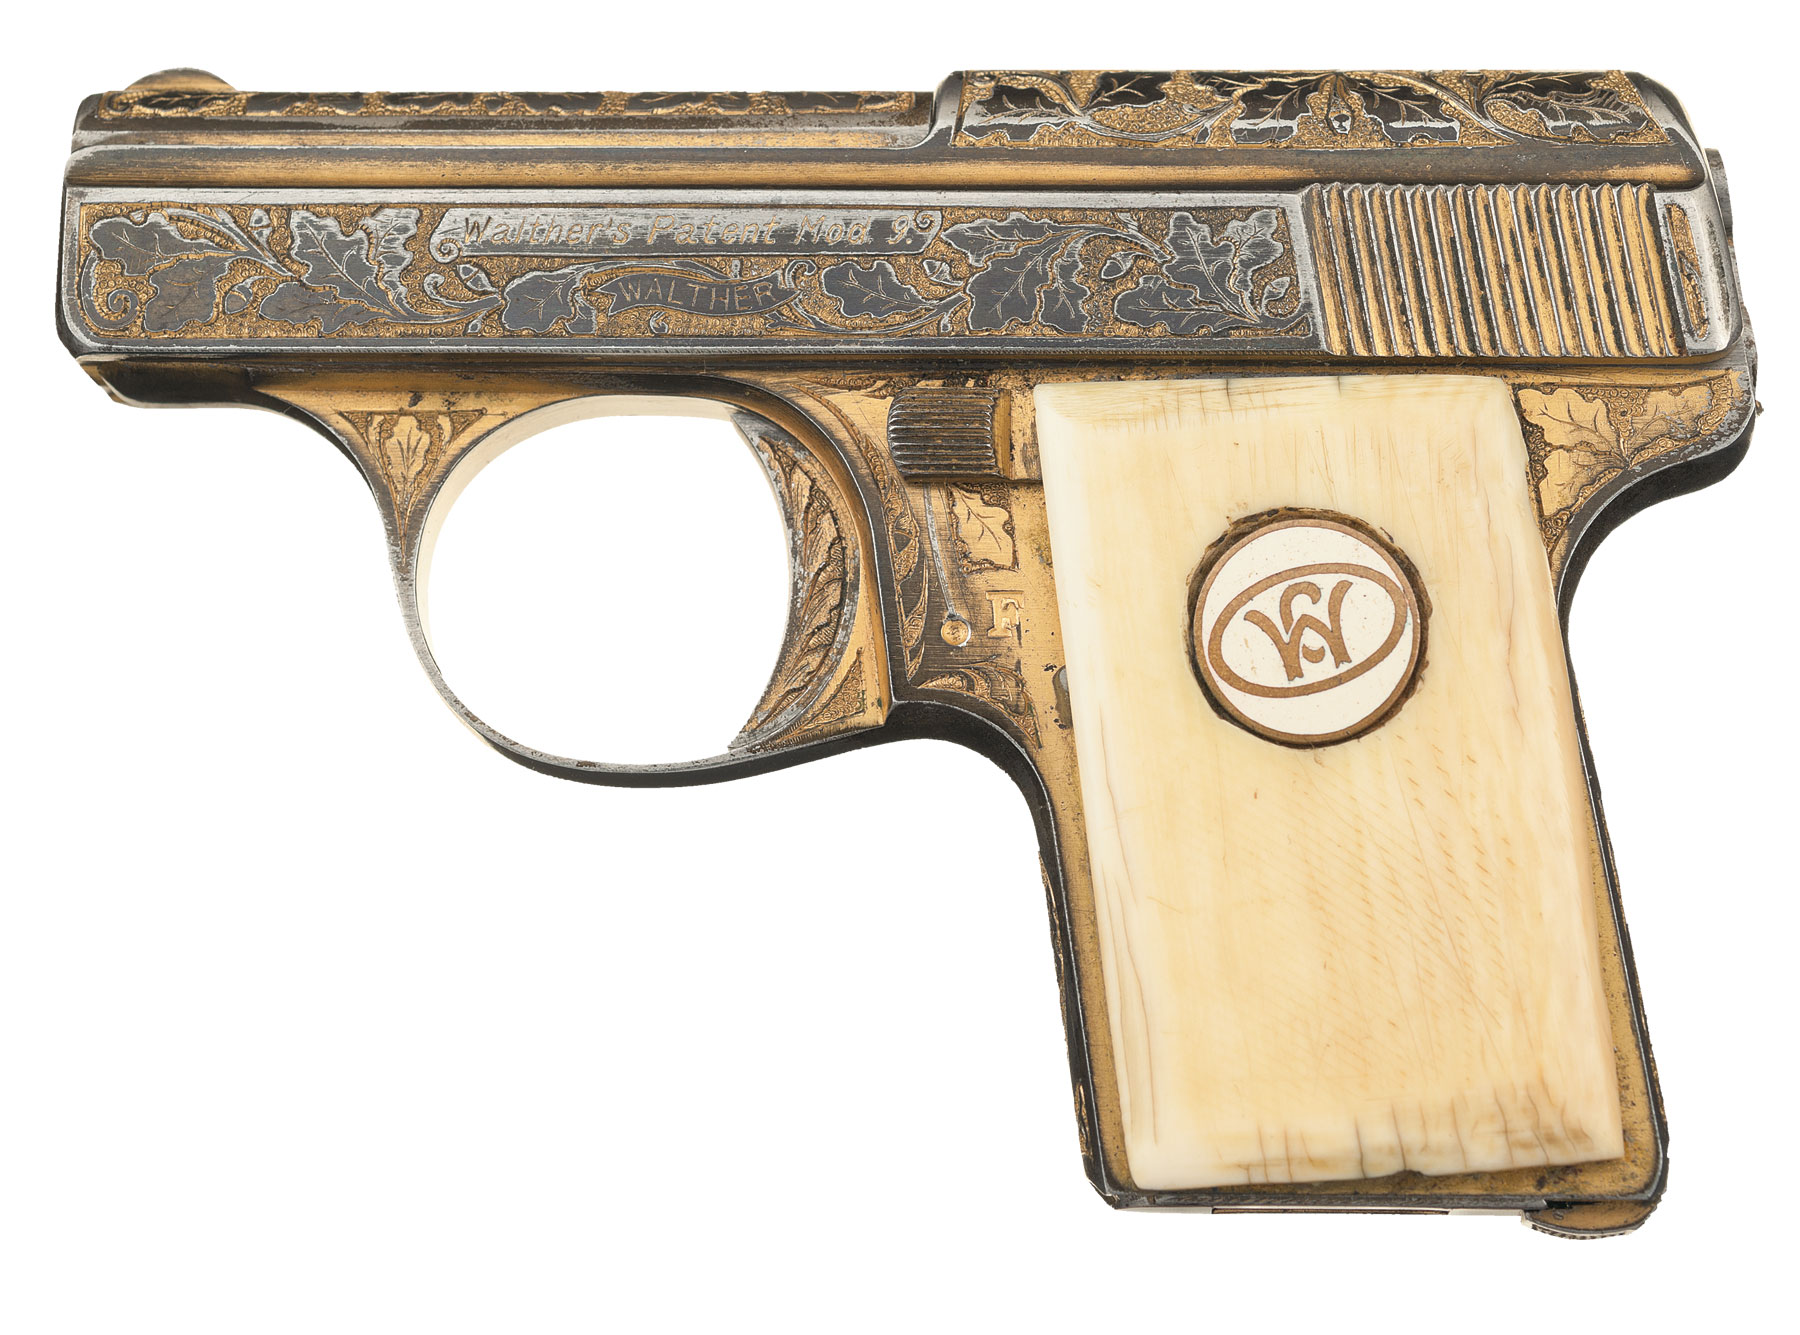 Walther Model 9